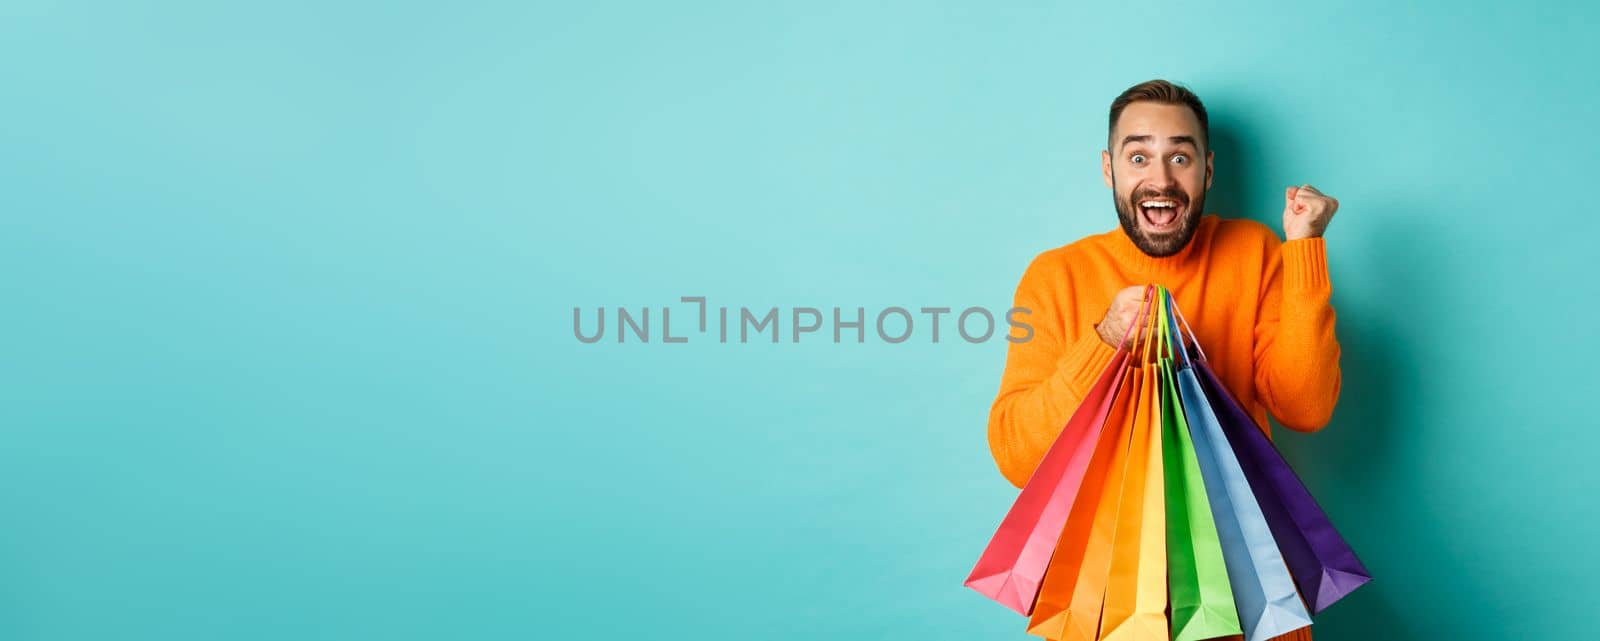 Lifestyle concept. Excited man showing shopping bags and rejoicing from discounts, standing over turquoise background.